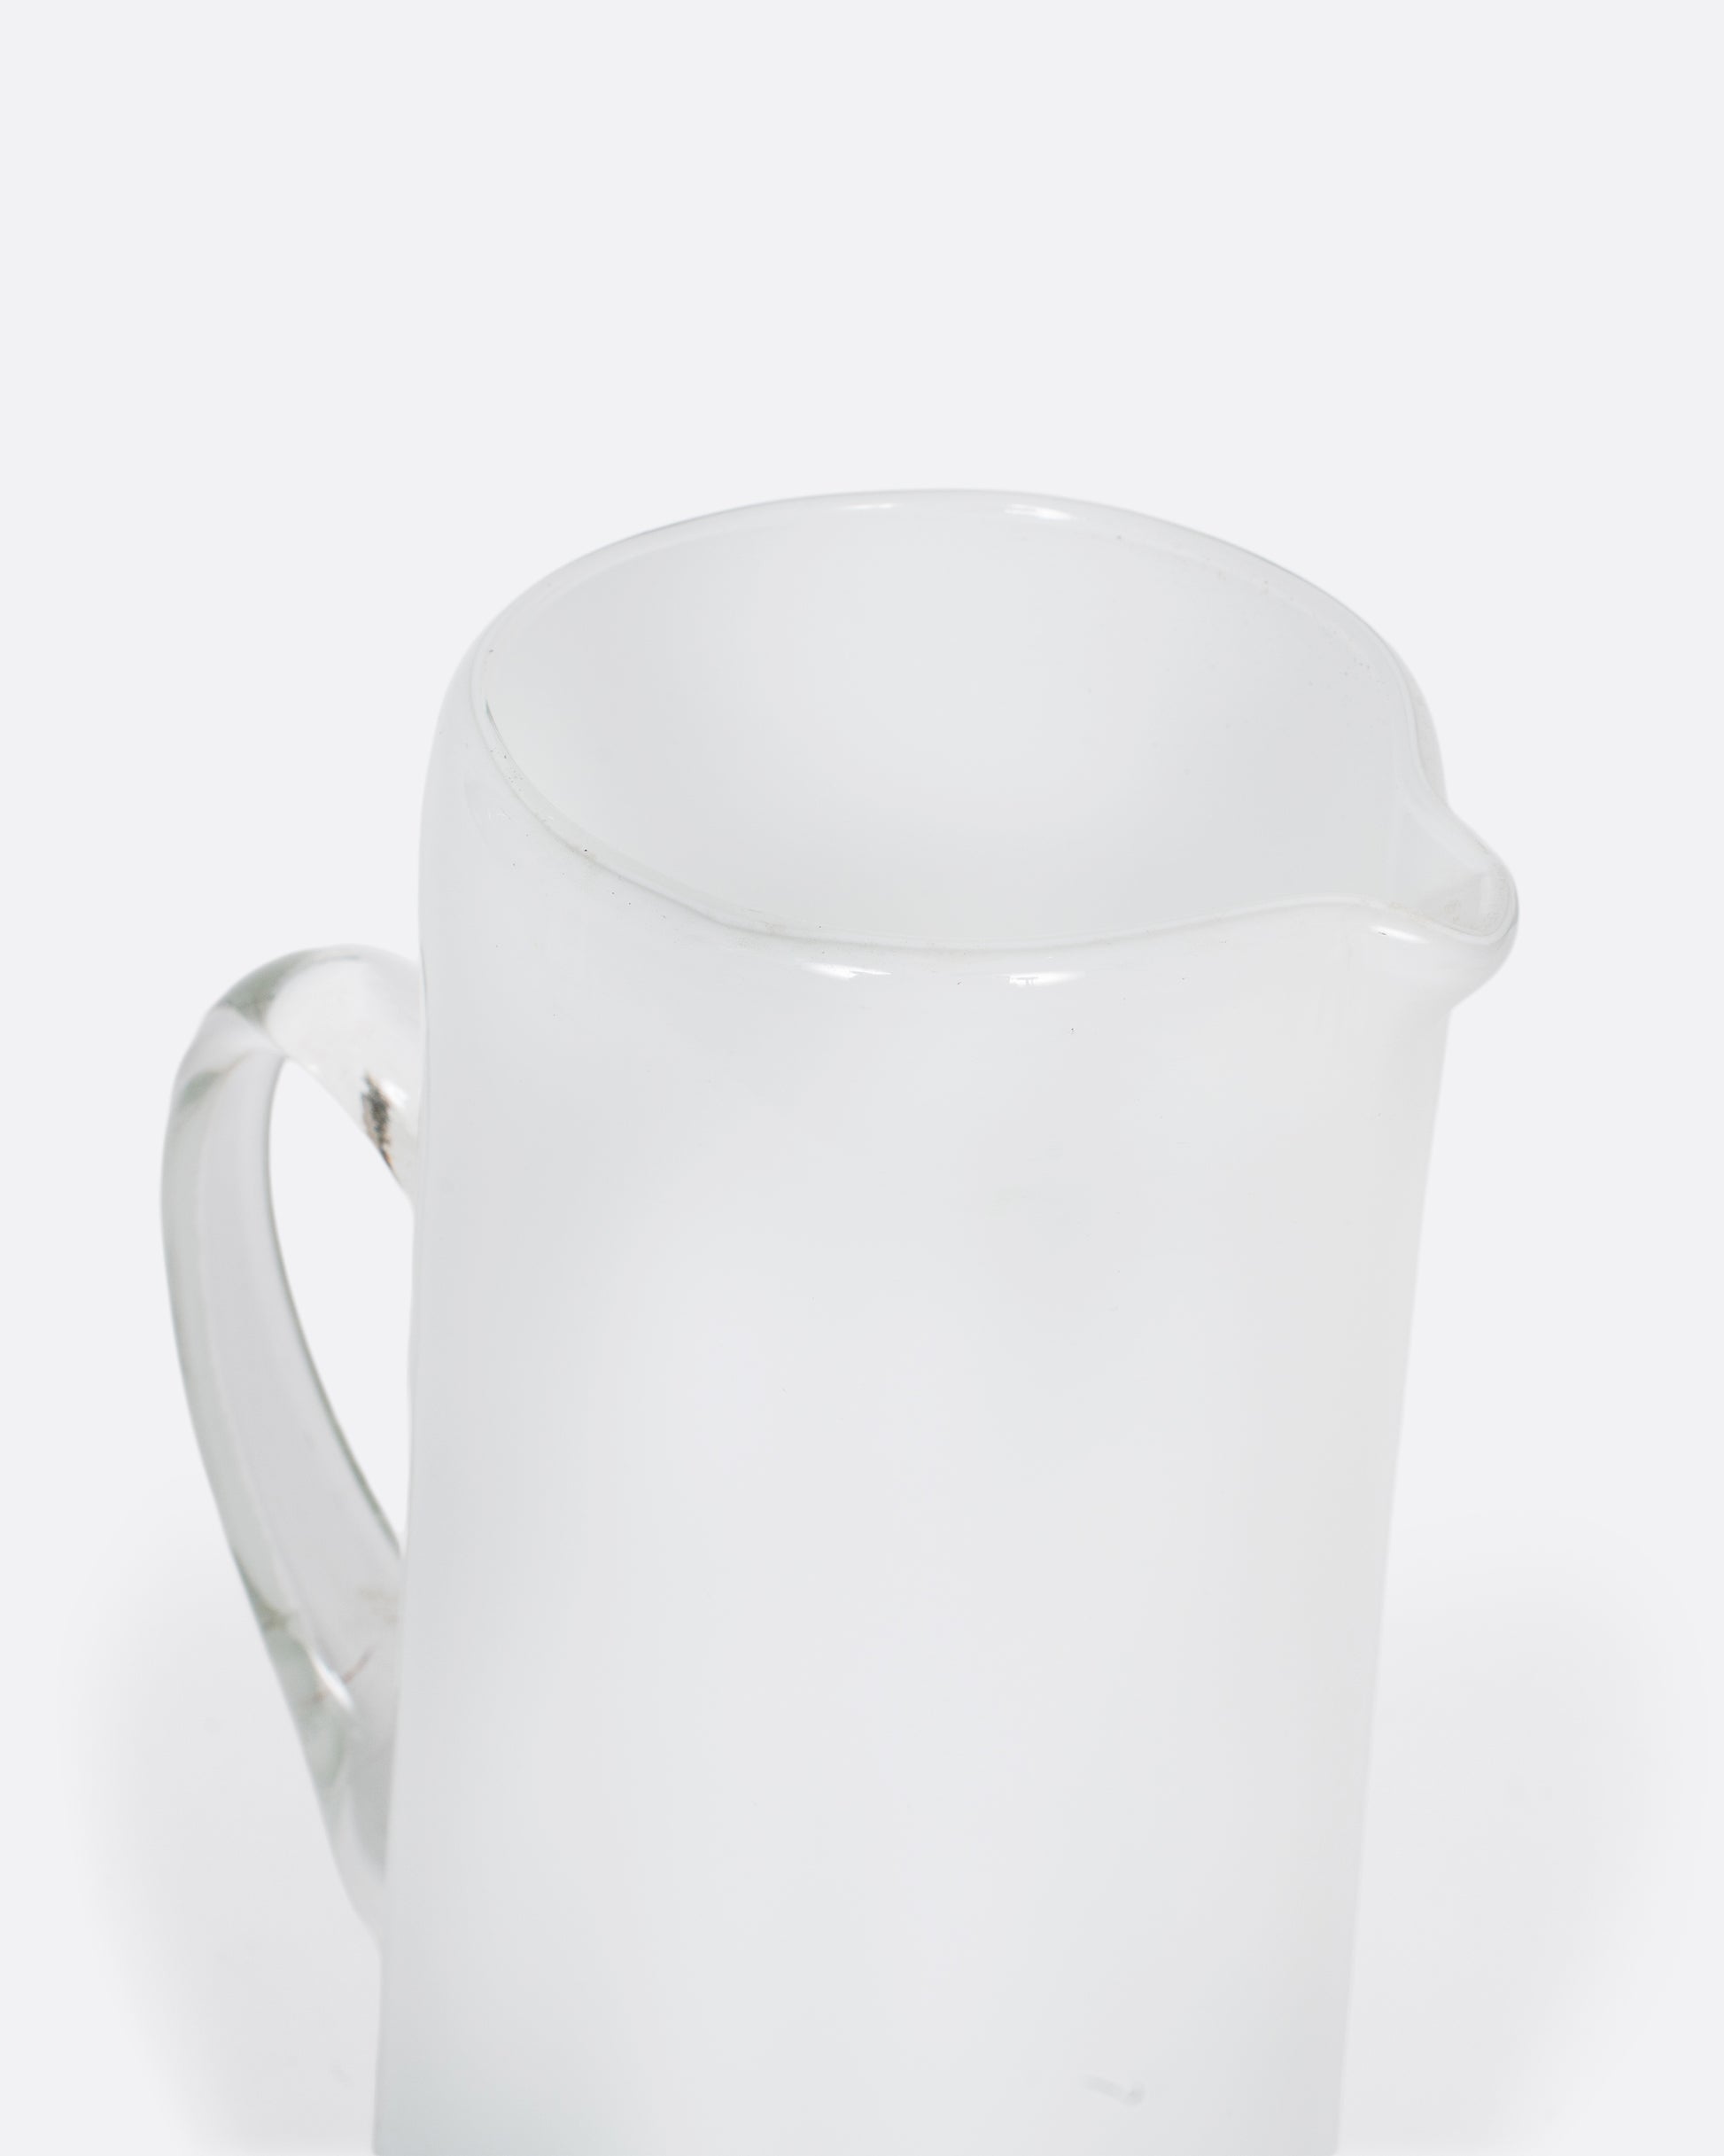 A vintage white cased glass pitcher. Two layers of white glass add depth to its color, creating an elegant, sleek look.